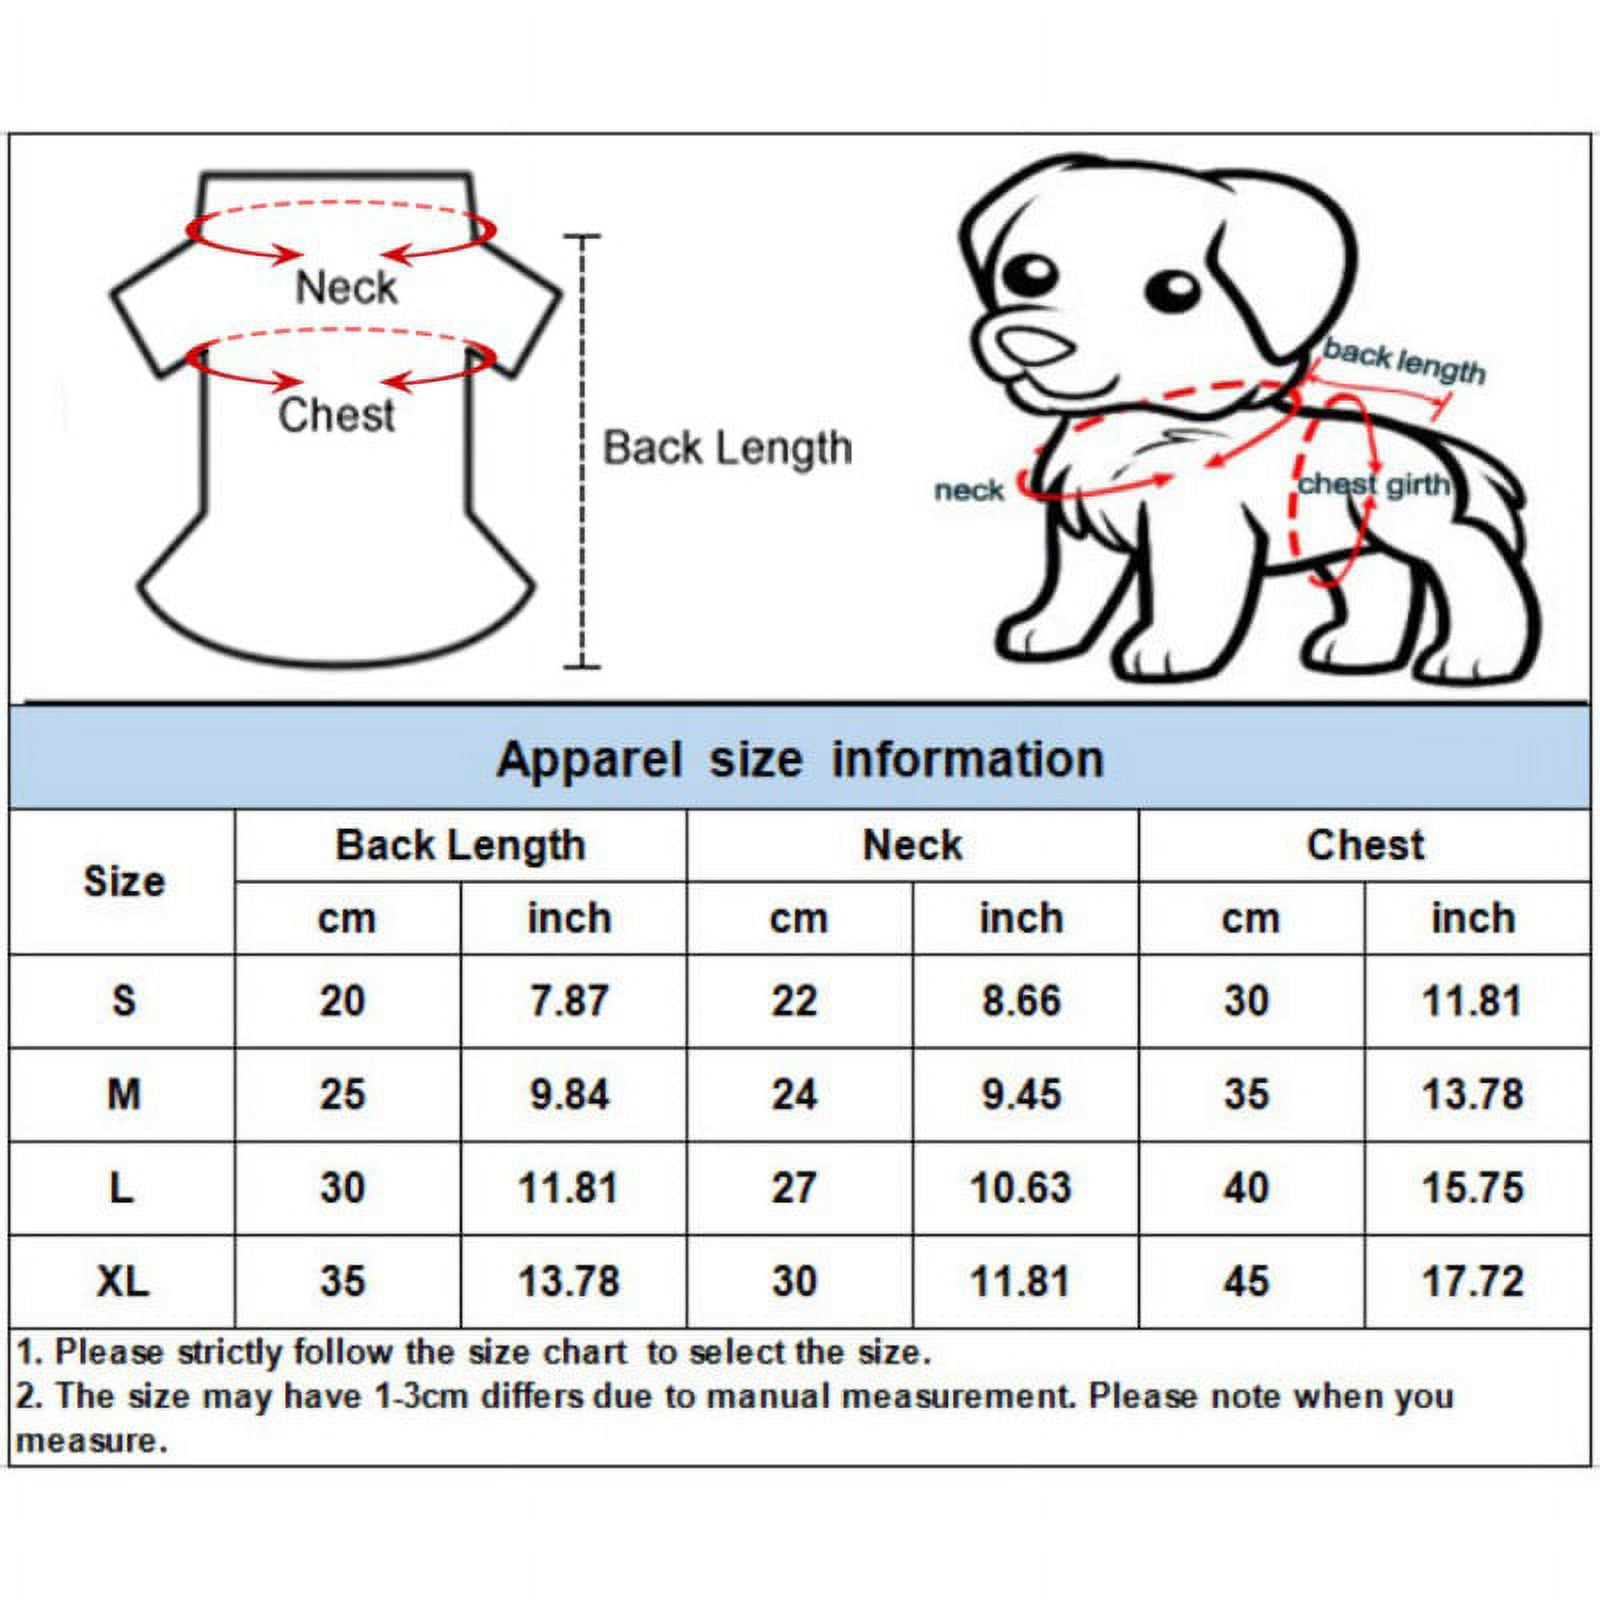  ZNZT Dog Clothes Cat Clothes Girl Small Dog Skirt Pet Clothing  Summer Spring Cat Dress Puppy Clothing Suitable for Small, Medium and Large  Dogs Or Cats Halloween : Pet Supplies